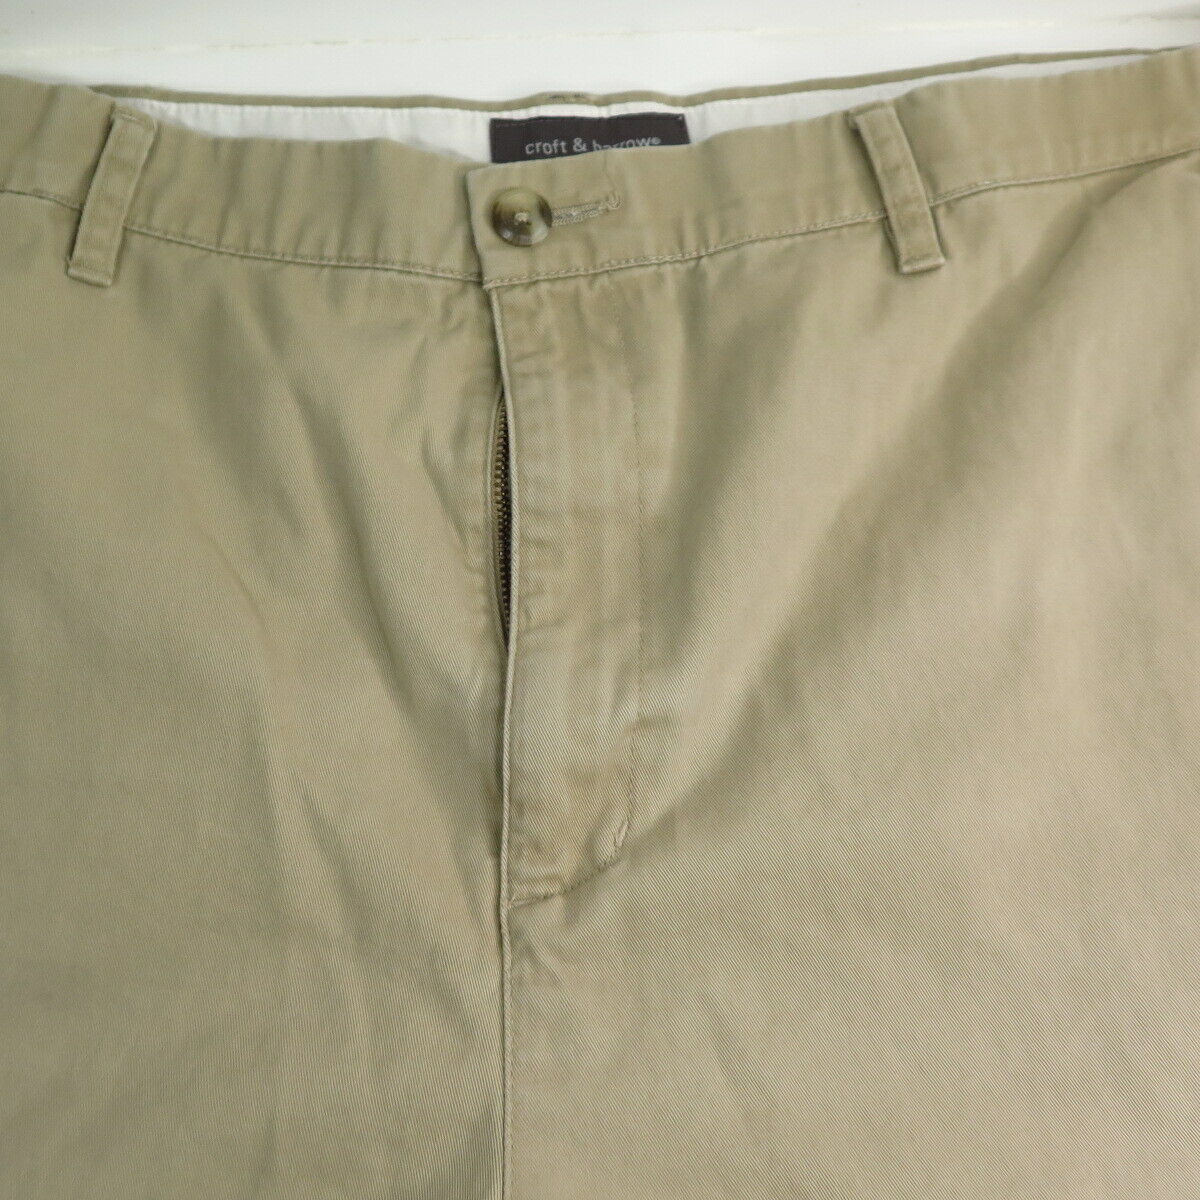 Croft and Barrow Men's Shorts size 44 Beige 100% … - image 3